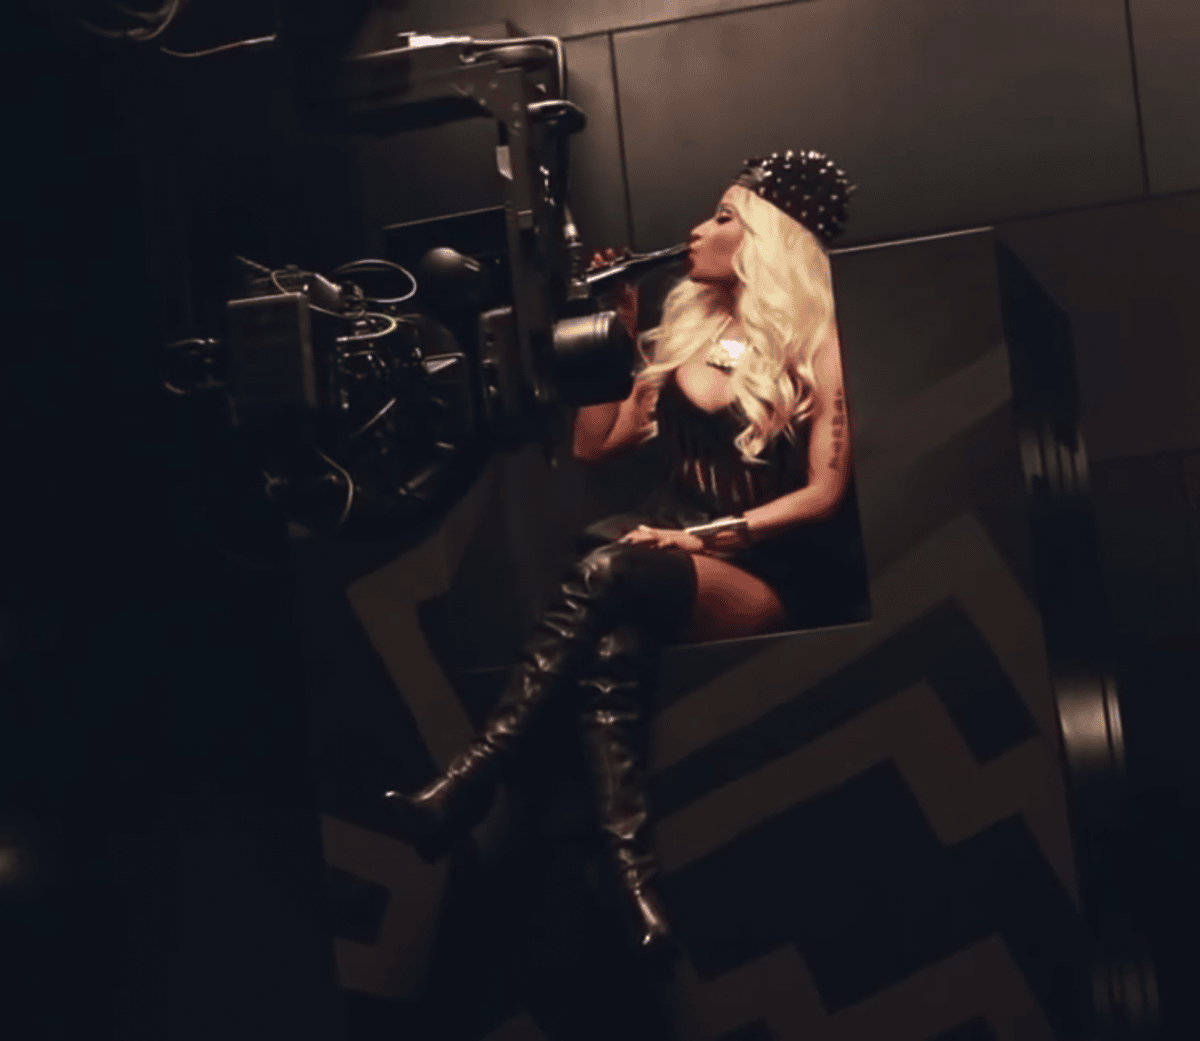 Mo-Sys Lambda with Roll axis filming Nicki Minaj for Nelly's "Get Like Me".